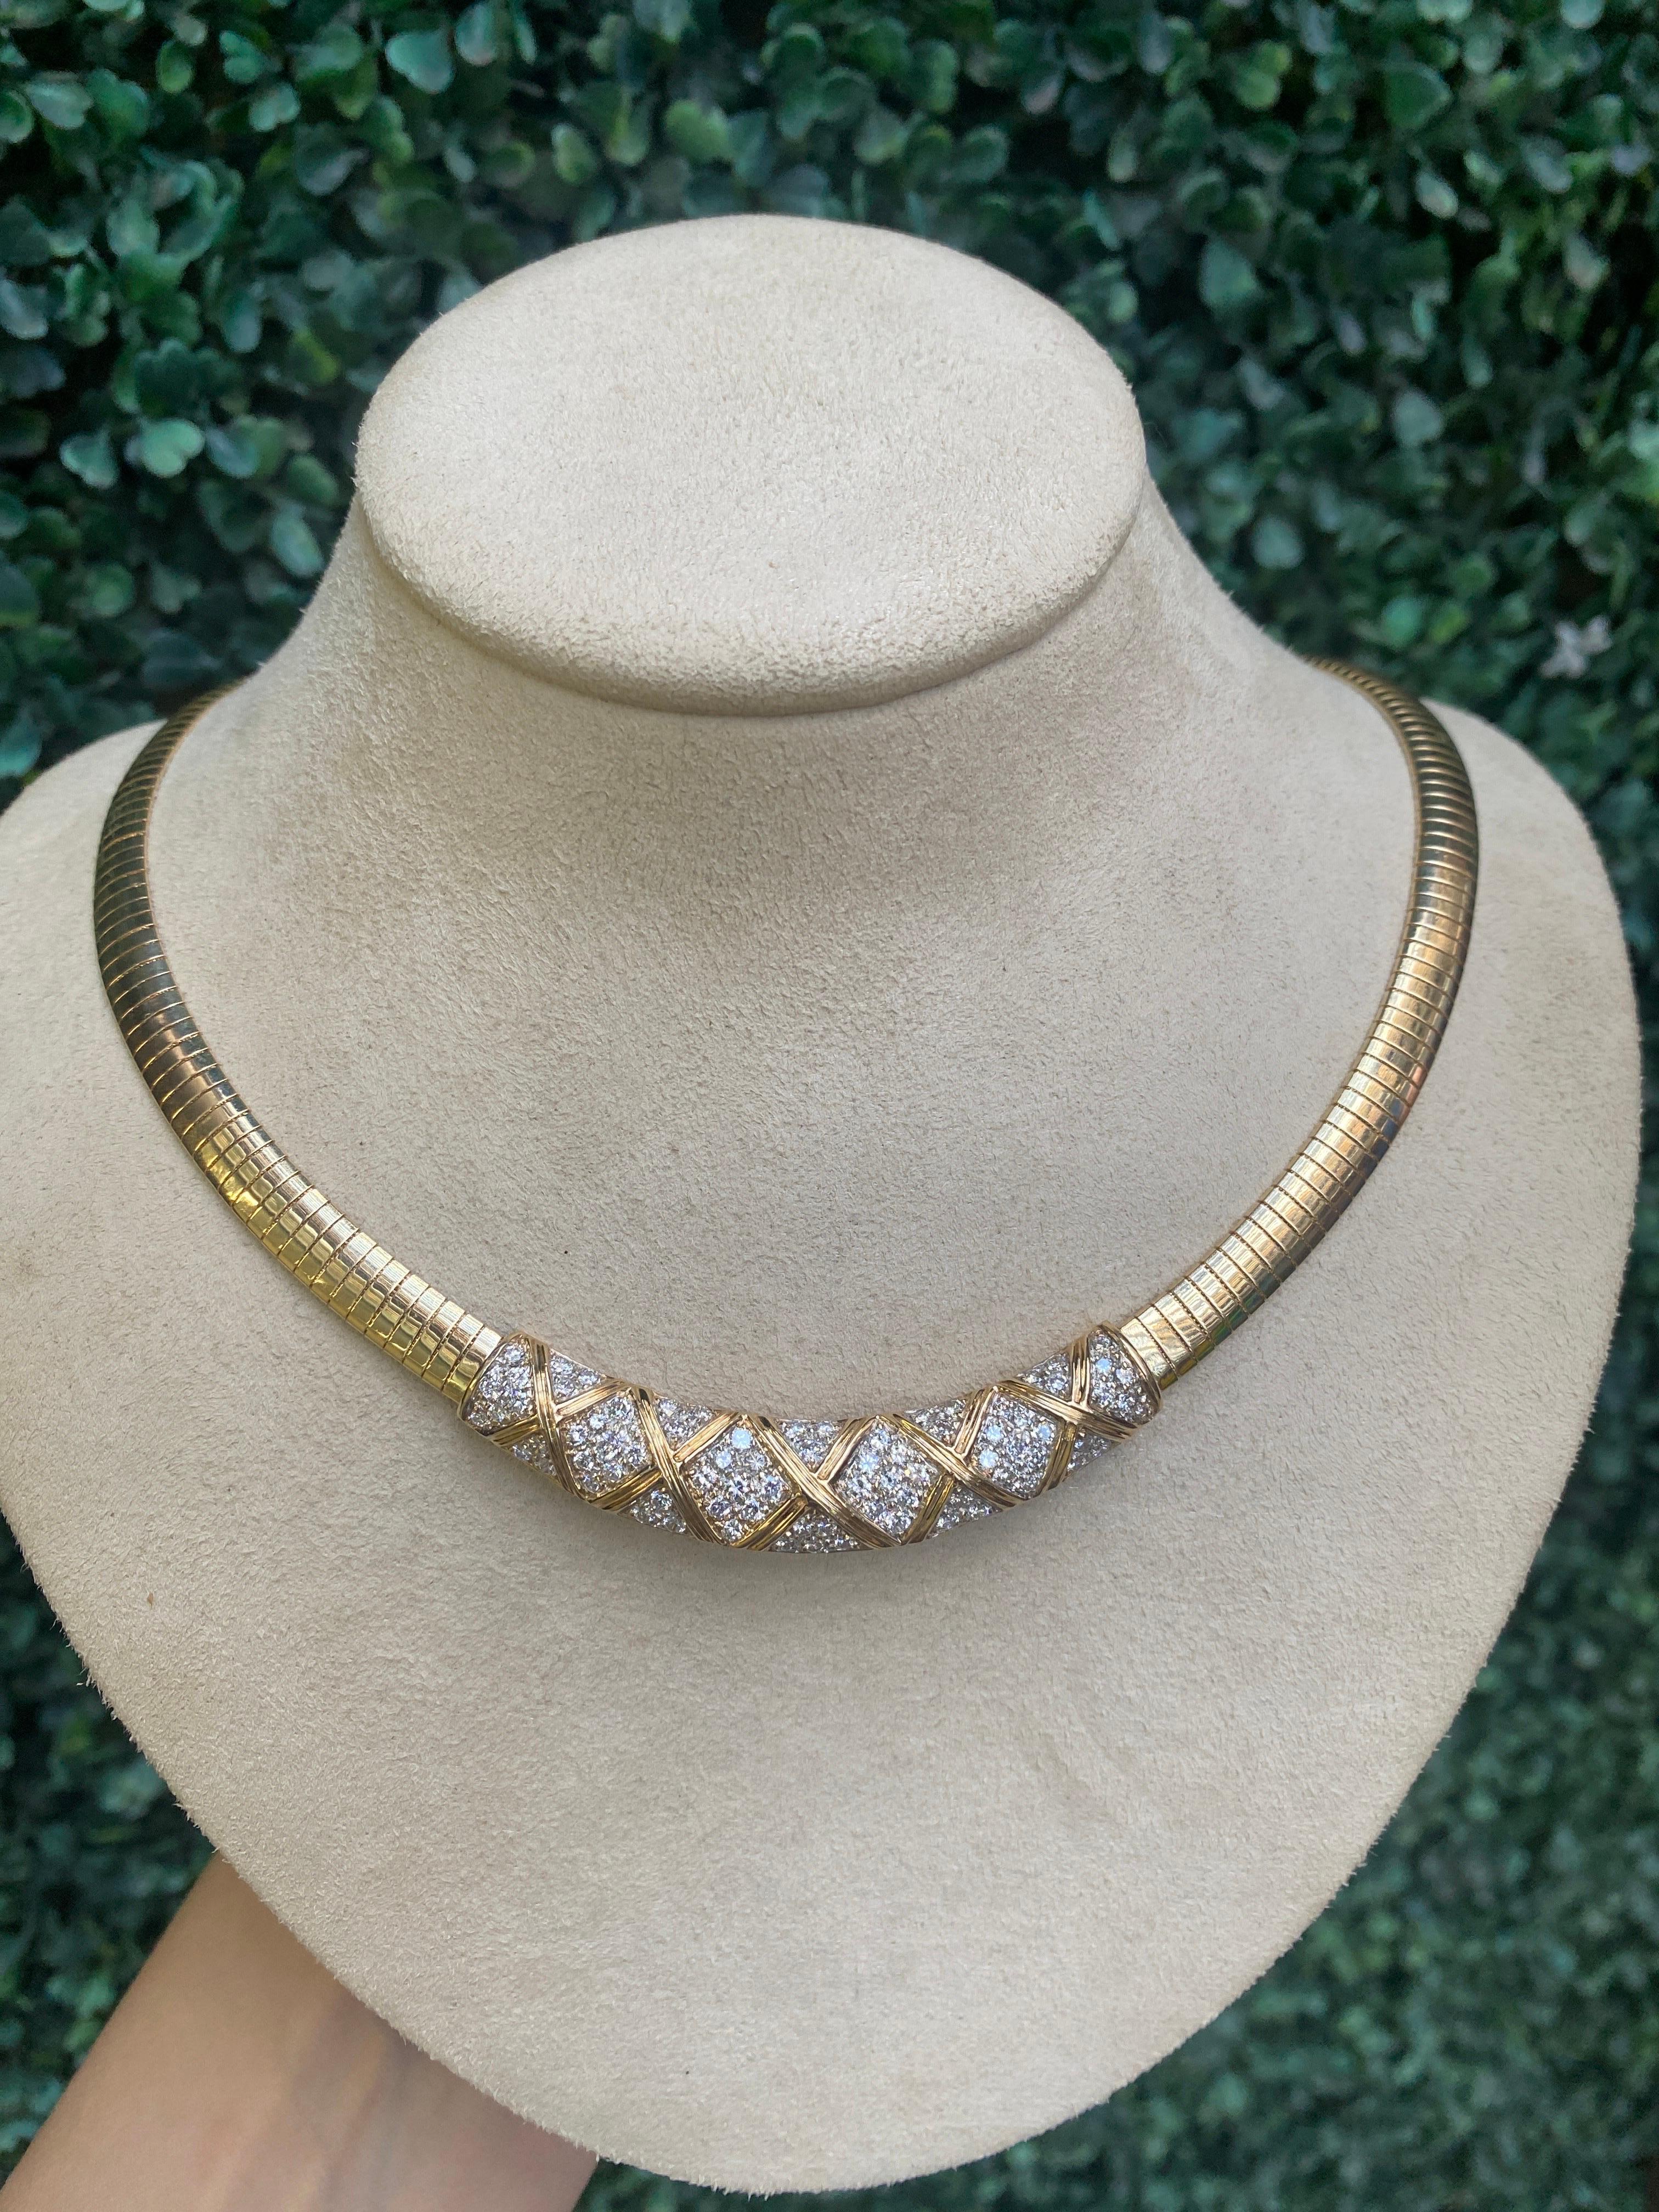 This vintage omega necklace features a station of 2.40 carat total weight in natural round diamonds centered and set in 14 karat yellow gold. Box clasp with safety. 
Condition: Very good. Typical of wear and age.